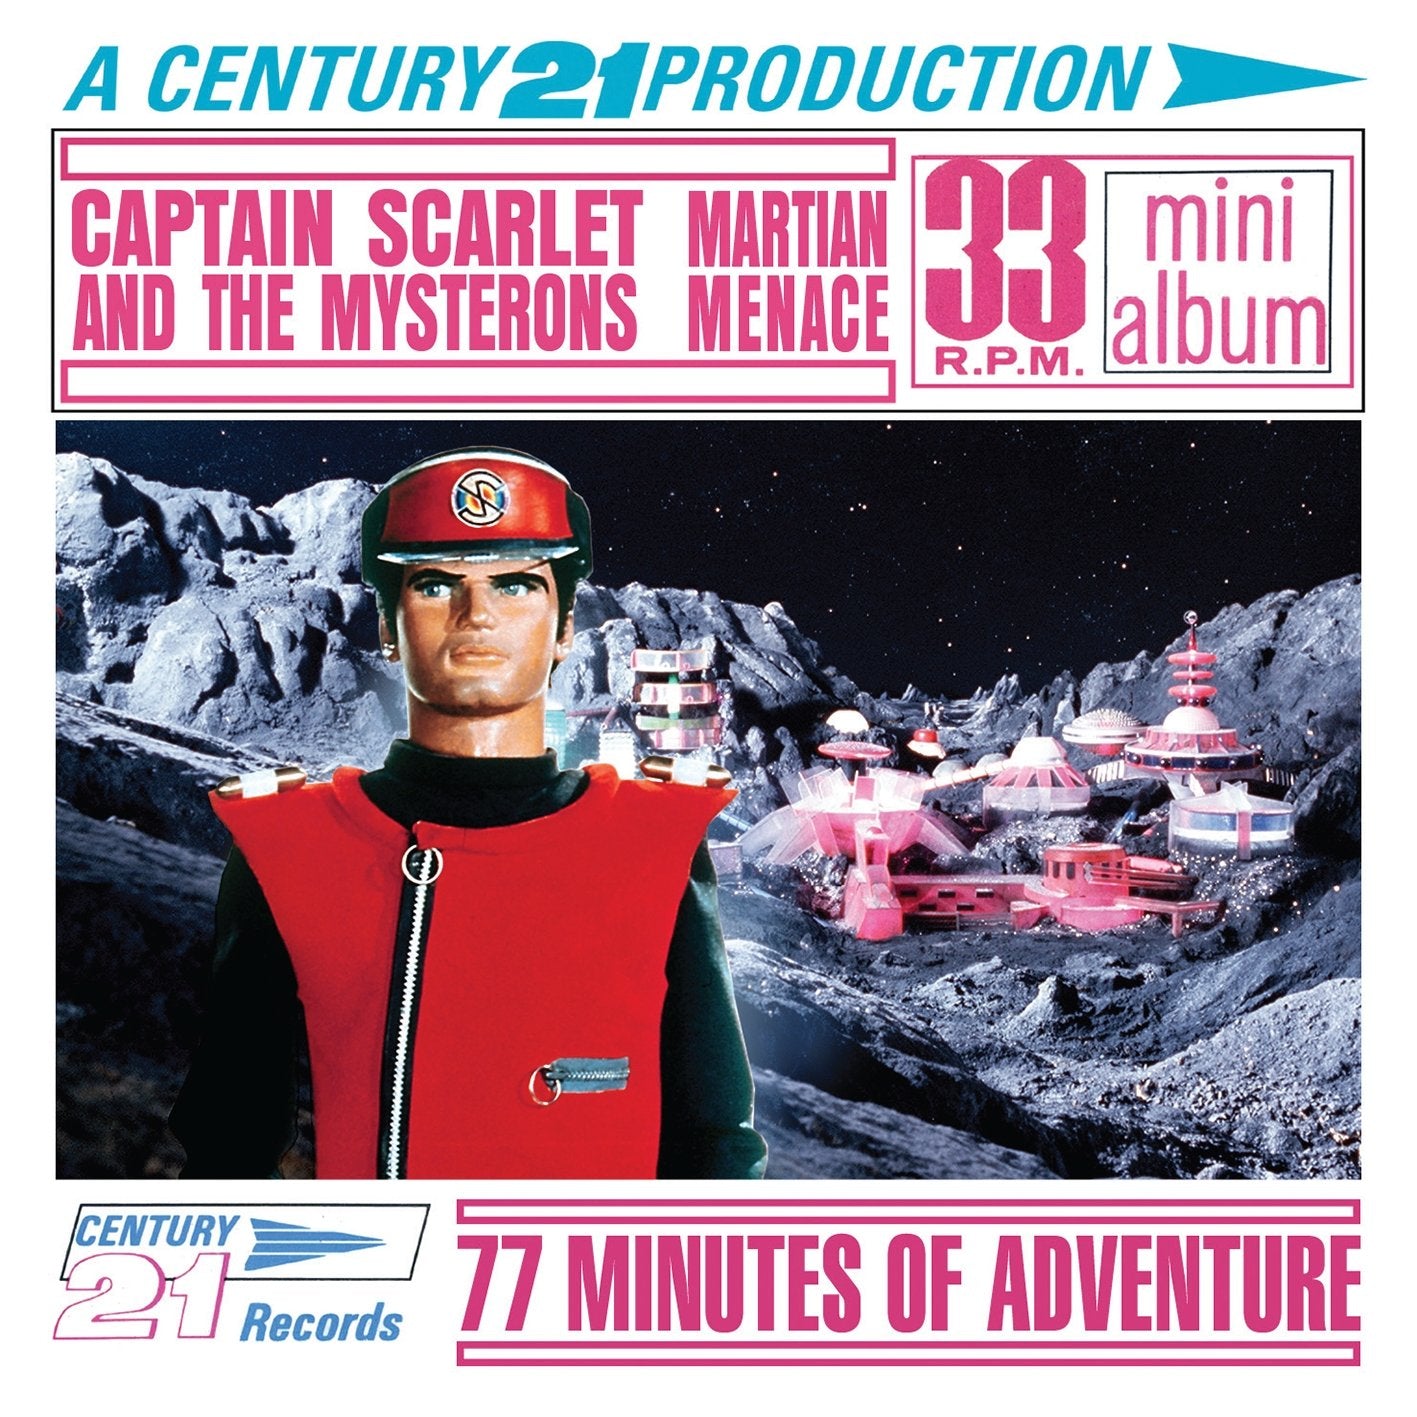 Captain Scarlet and the Mysterons: Martian Menace: Limited Edi